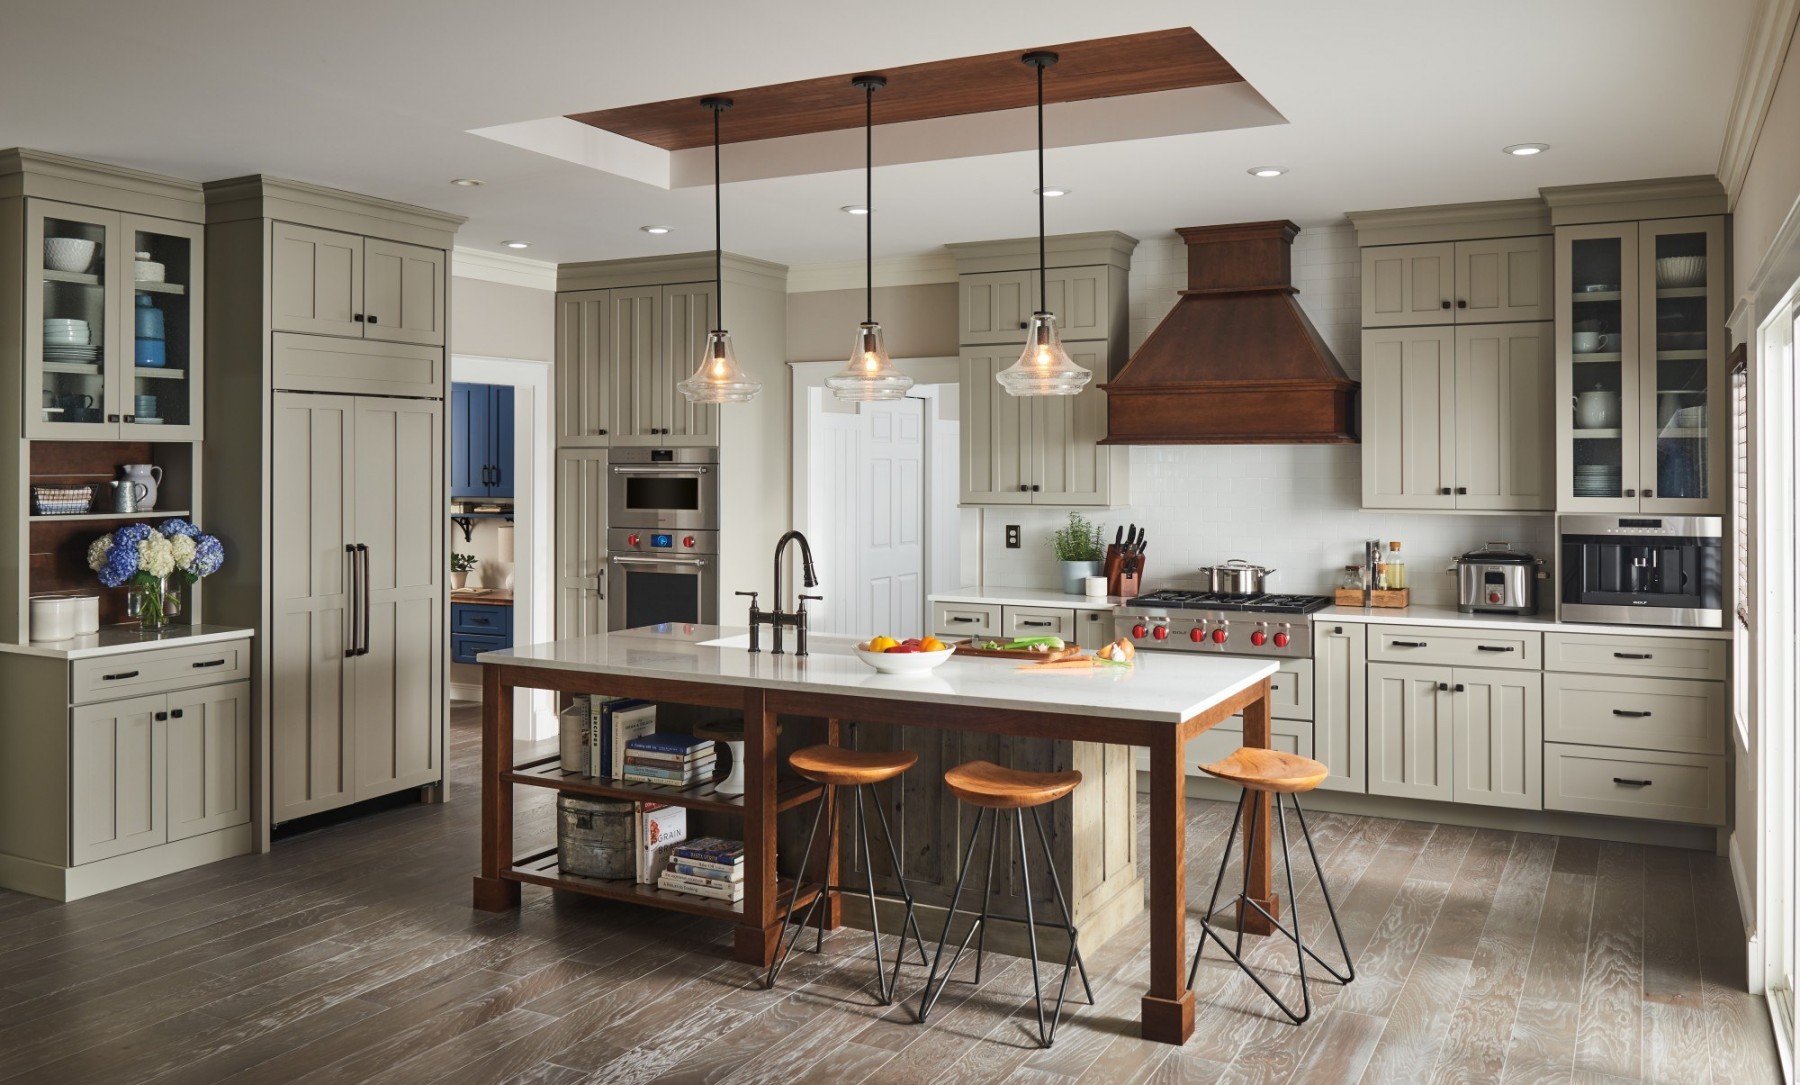 What To Consider When Starting A Kitchen Remodel - Earth Elements